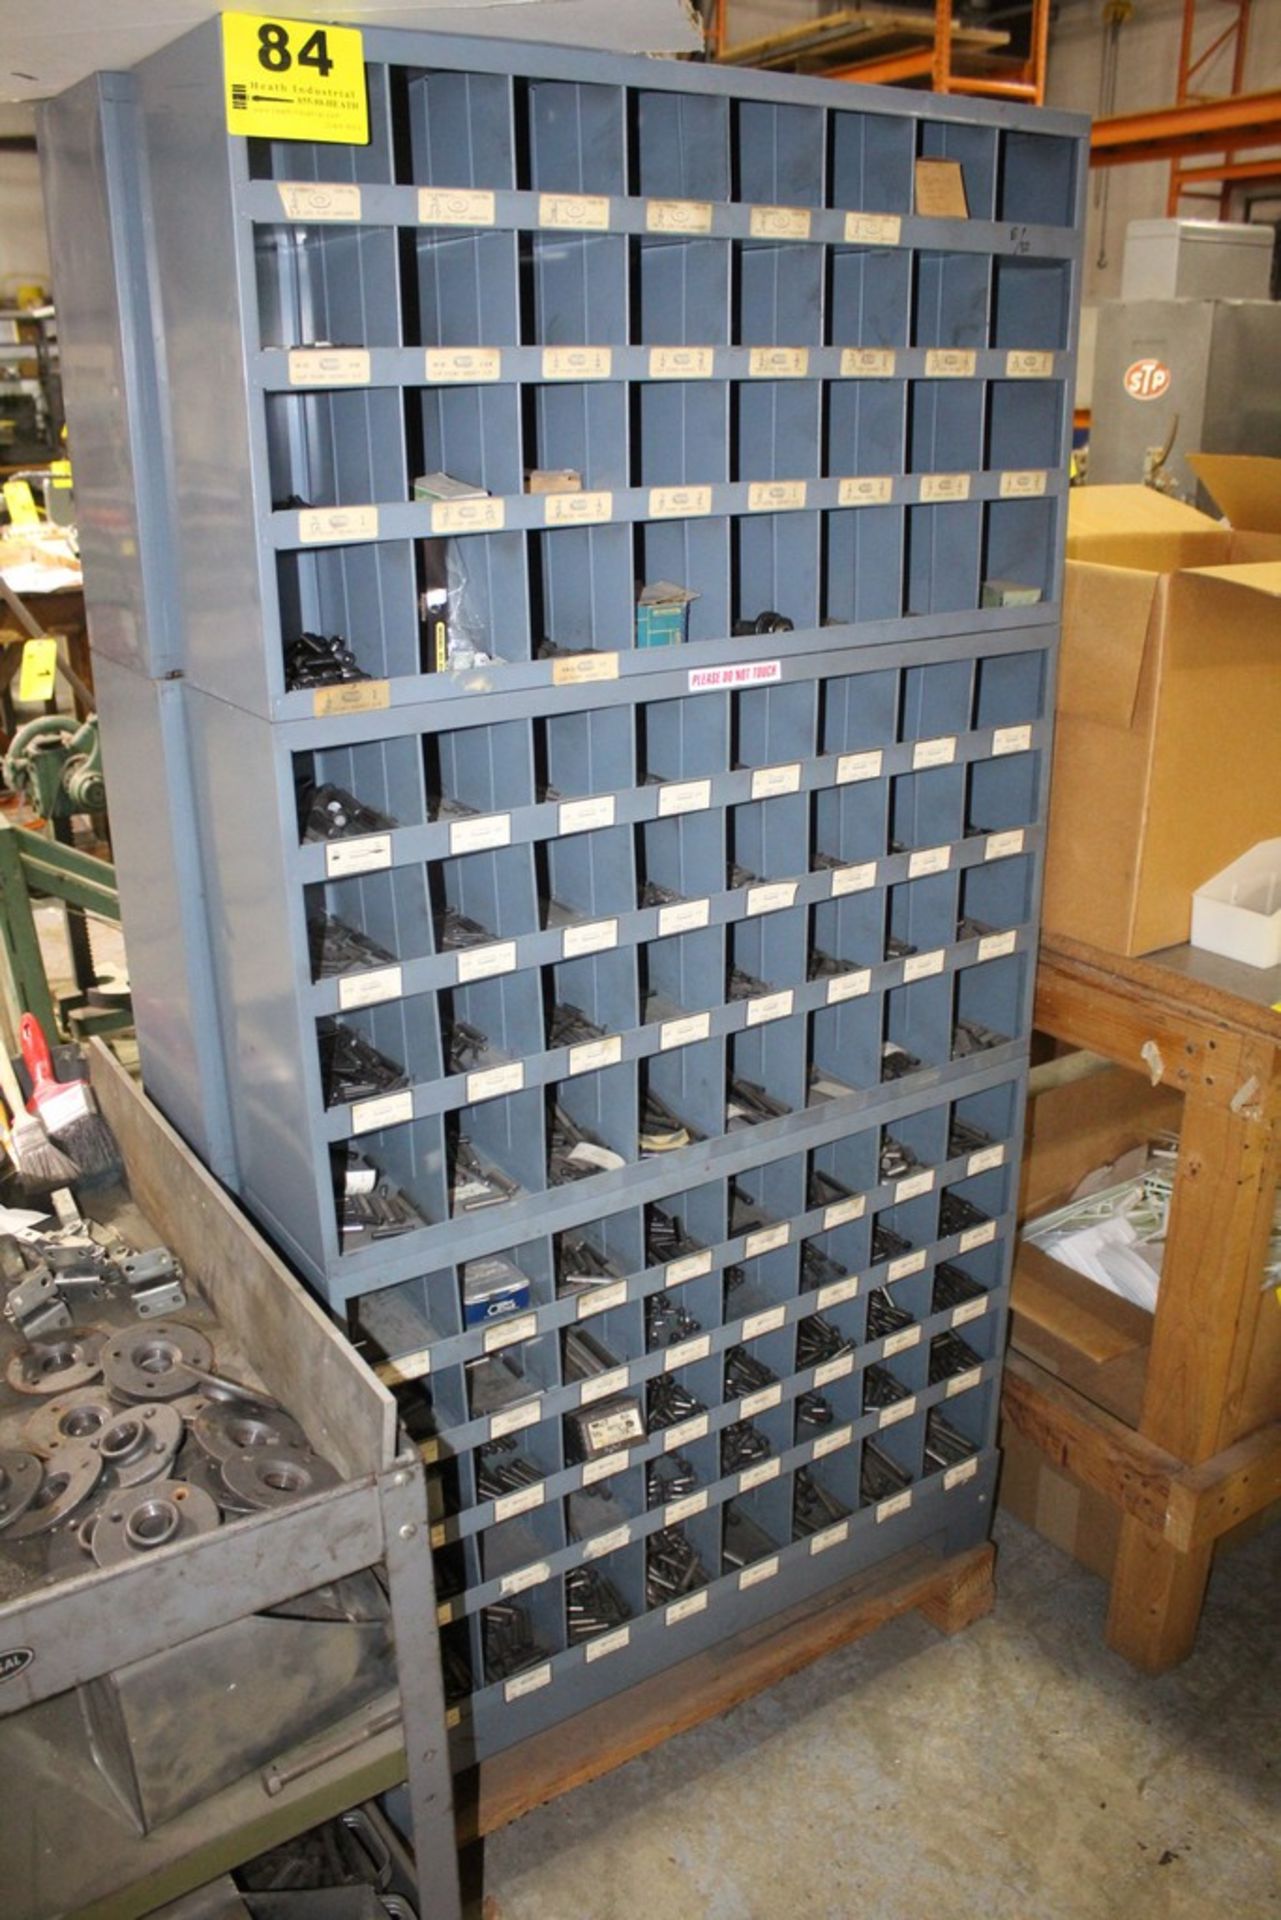 (3) 32 SLOT PIGEON HOLE PARTS CABINETS AND CONTENTS OF SORTED SET SCREWS, DOWEL PINS AND SHOULDER